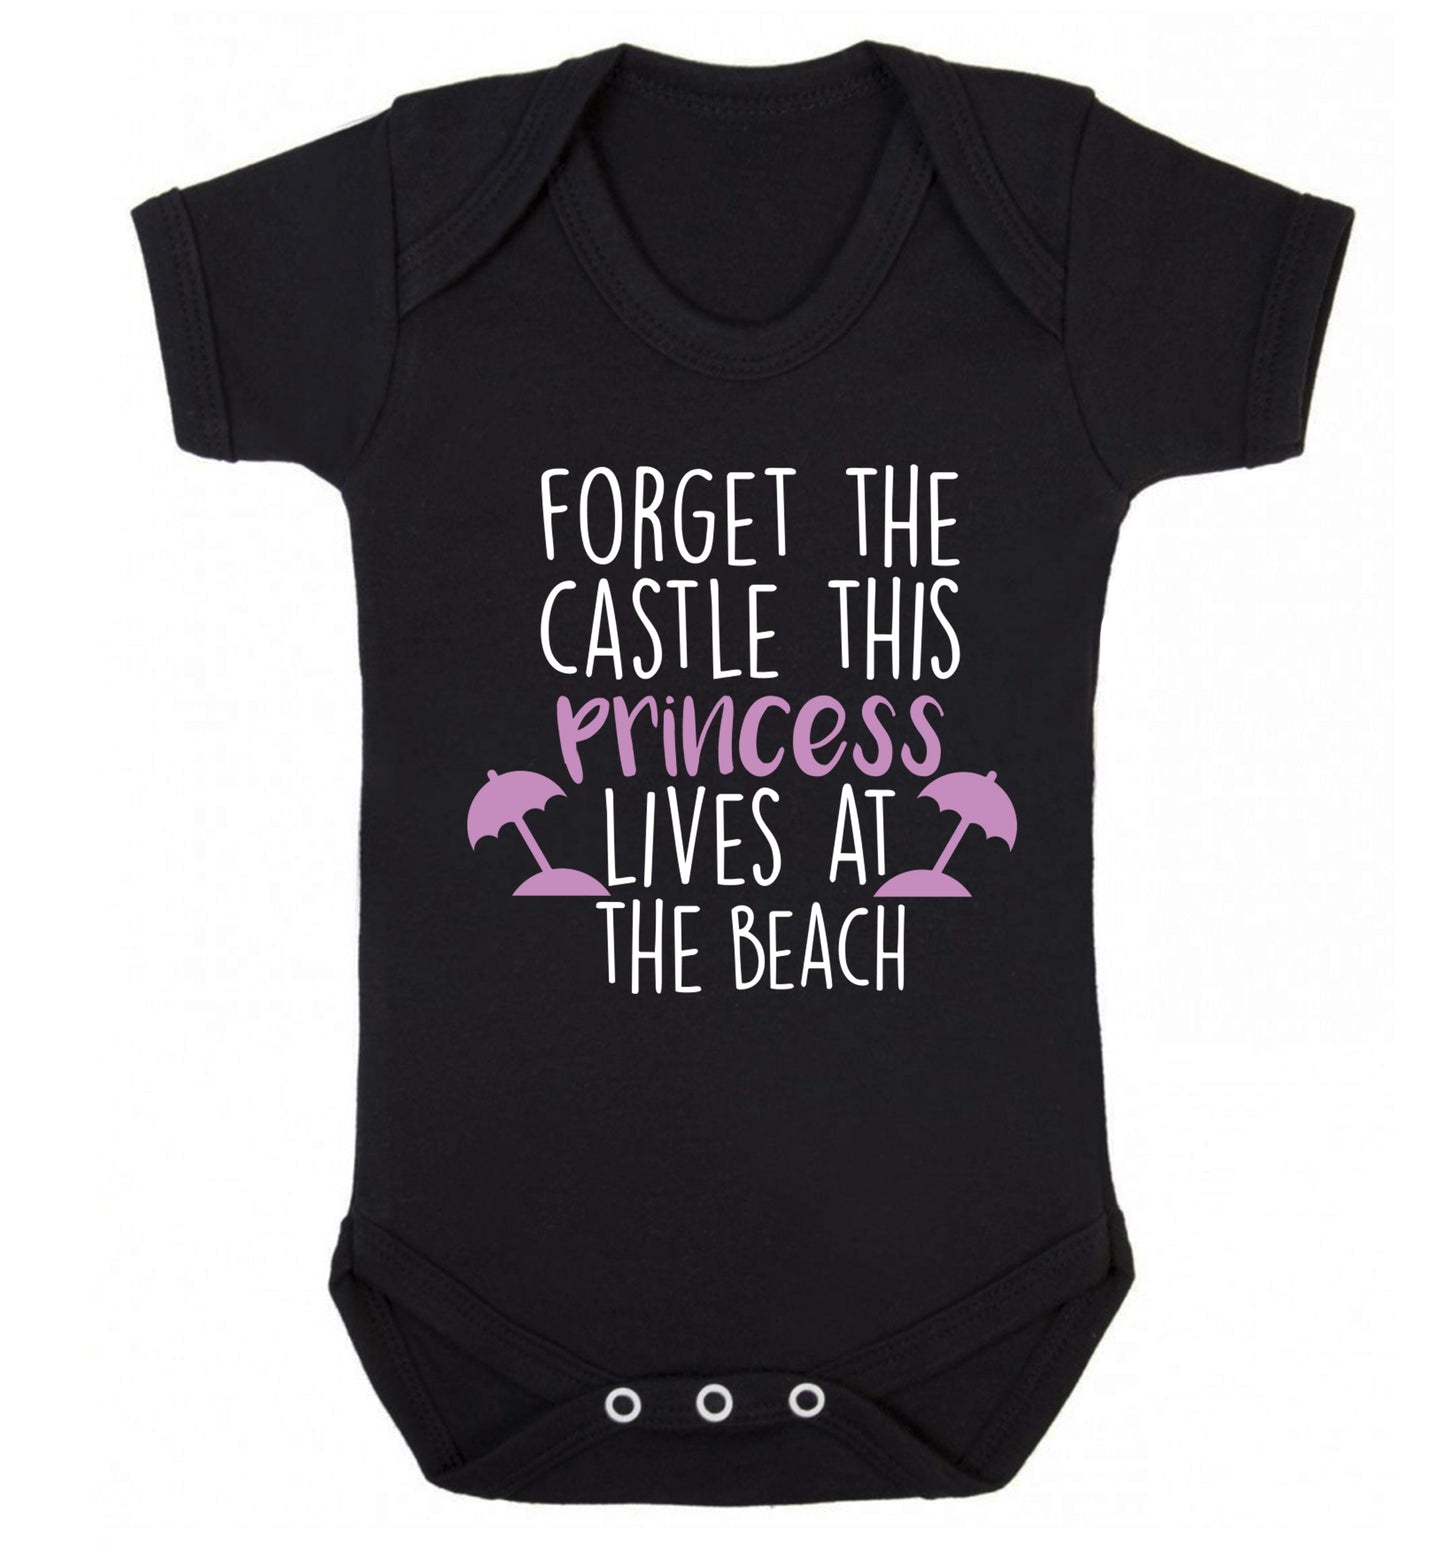 Forget the castle this princess lives at the beach Baby Vest black 18-24 months